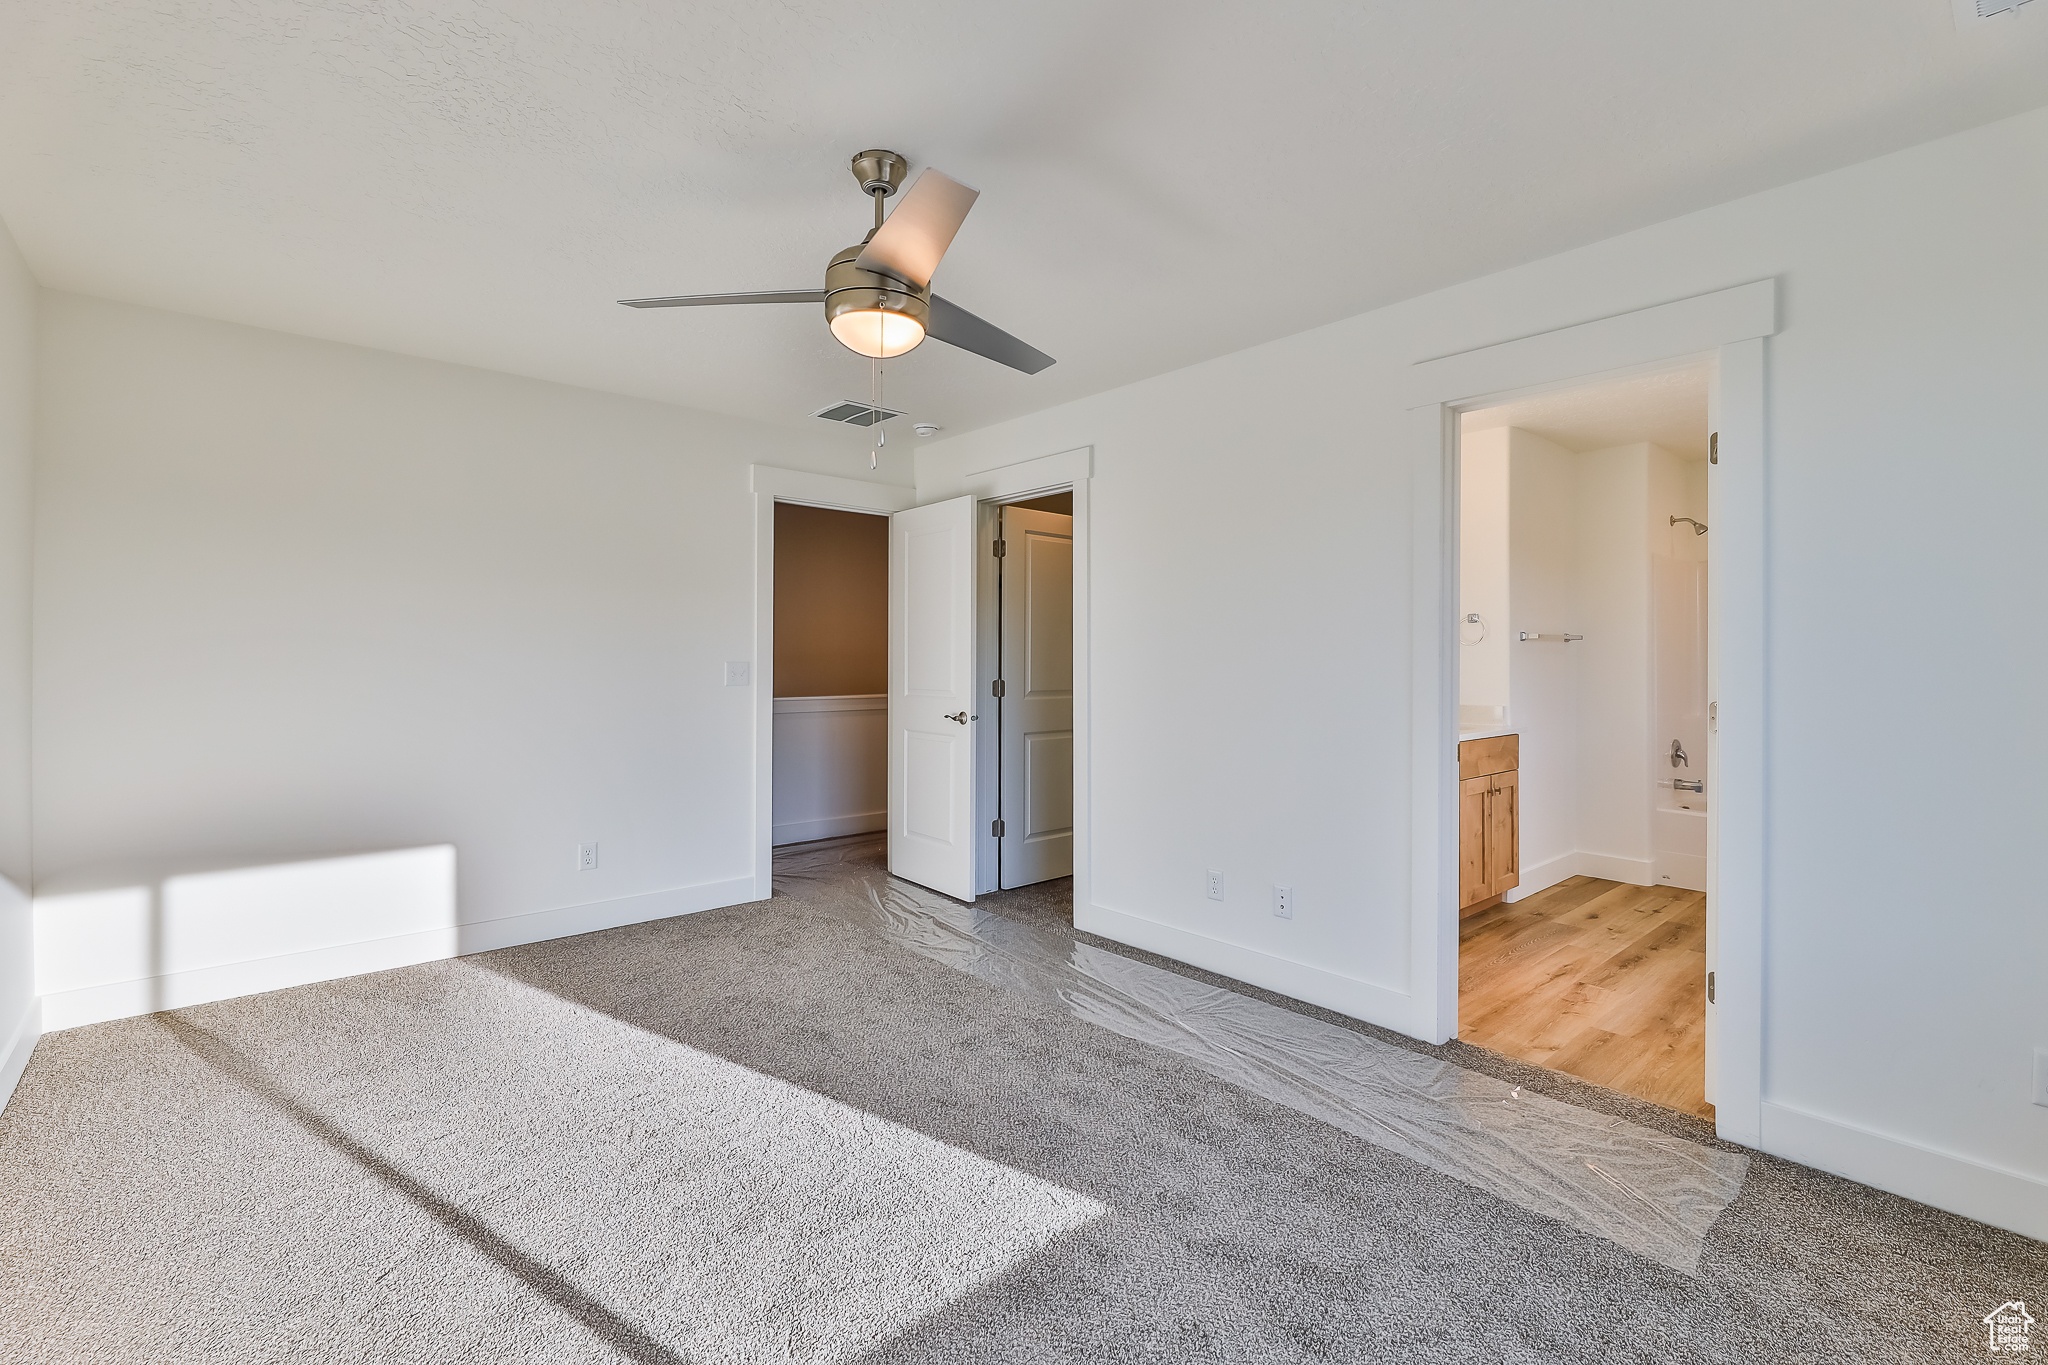 Unfurnished bedroom with connected bathroom, ceiling fan, and carpet